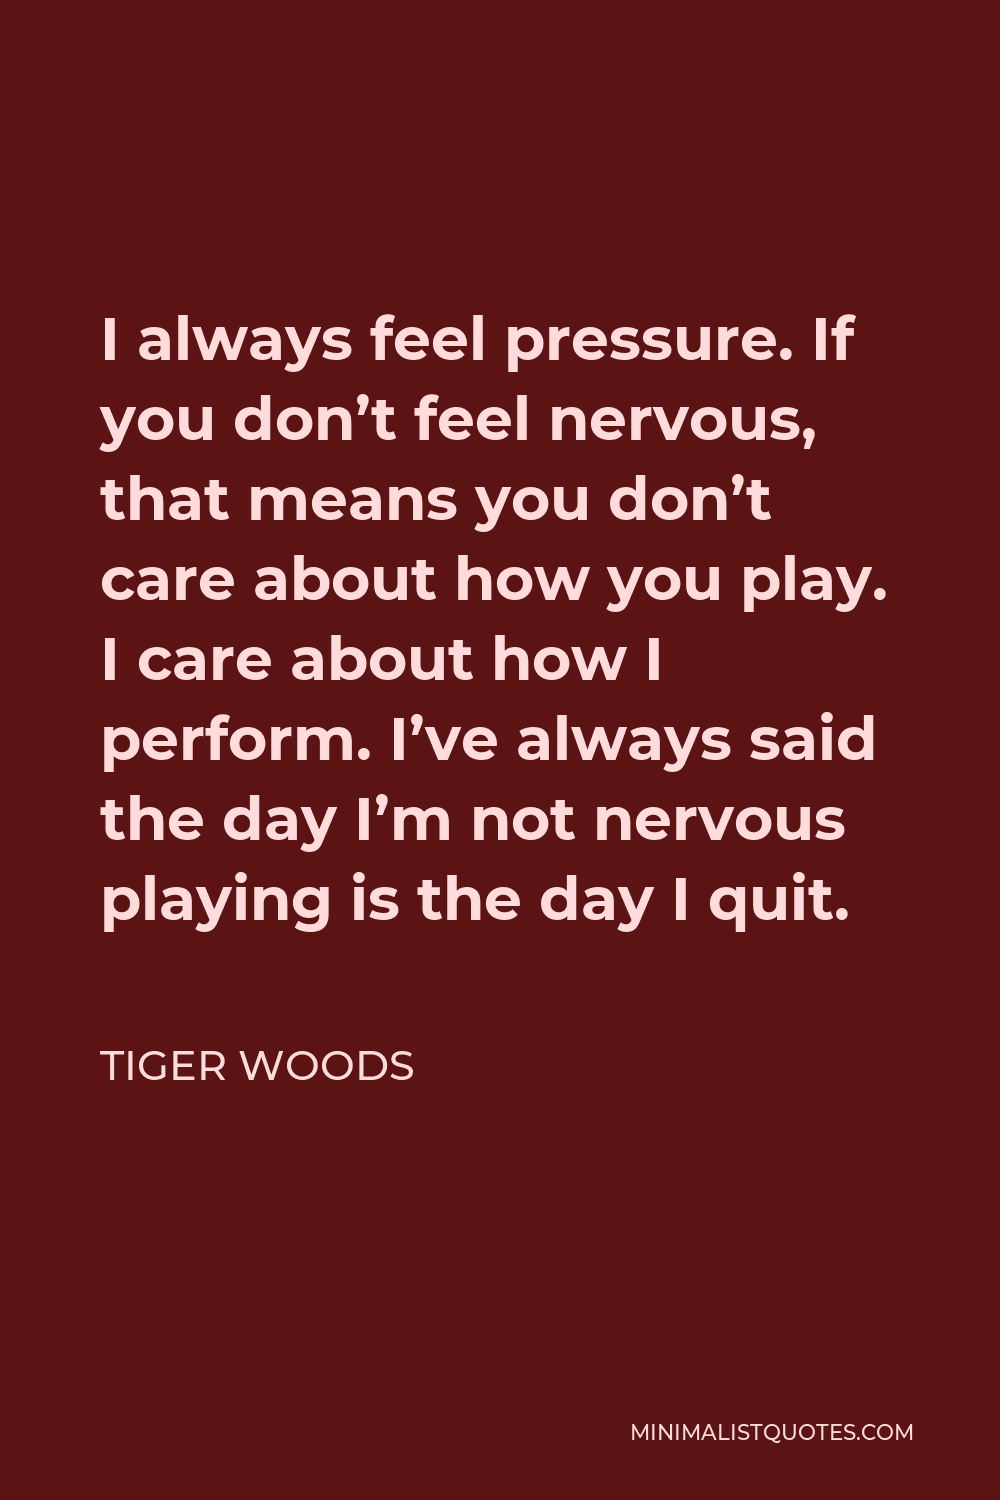 Tiger Woods Quote - I always feel pressure. If you don’t feel nervous, that means you don’t care about how you play. I care about how I perform. I’ve always said the day I’m not nervous playing is the day I quit.